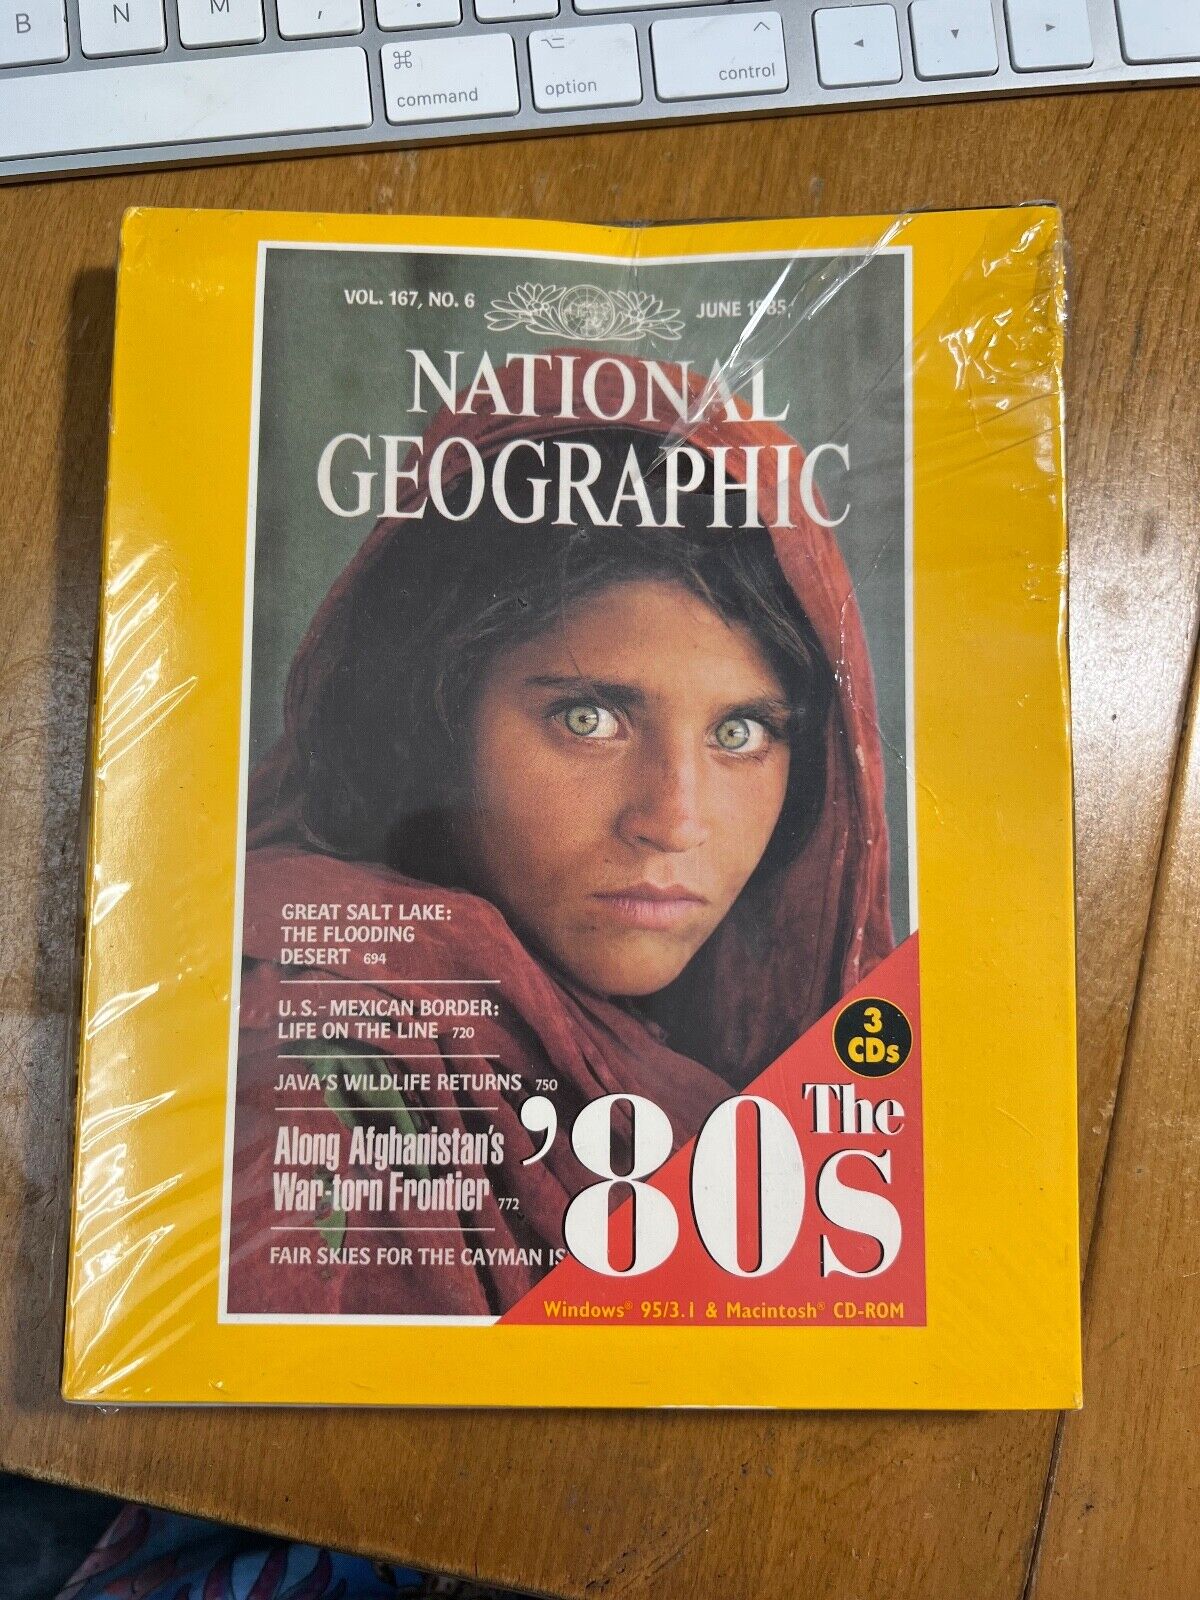 National Geographic: The 80s New CD-ROM Digital Magazine